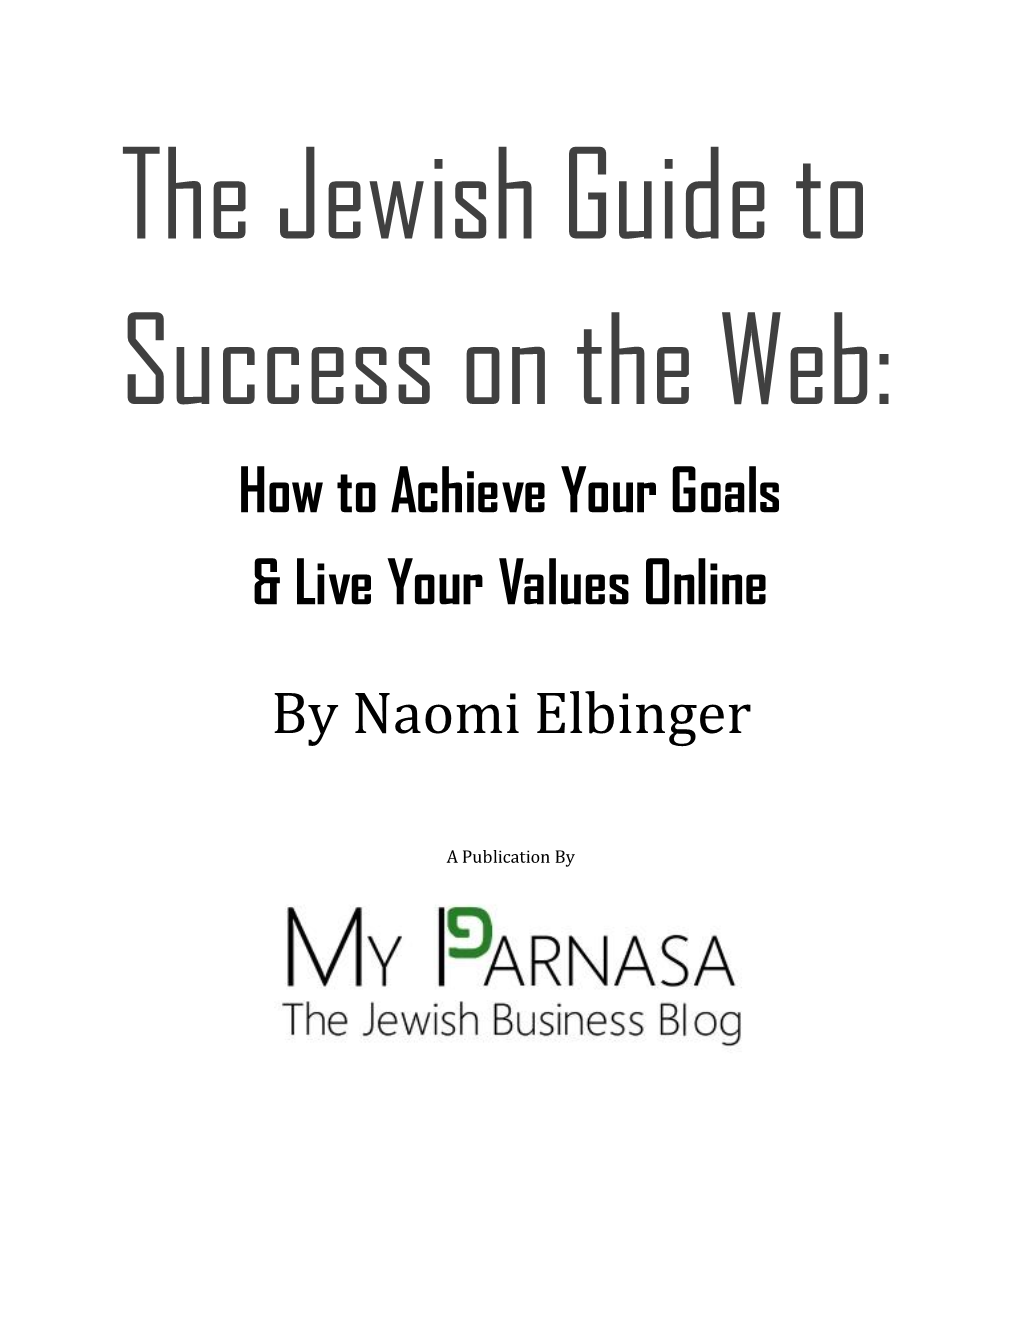 The Jewish Guide to Success on the Web: How to Achieve Your Goals & Live Your Values Online